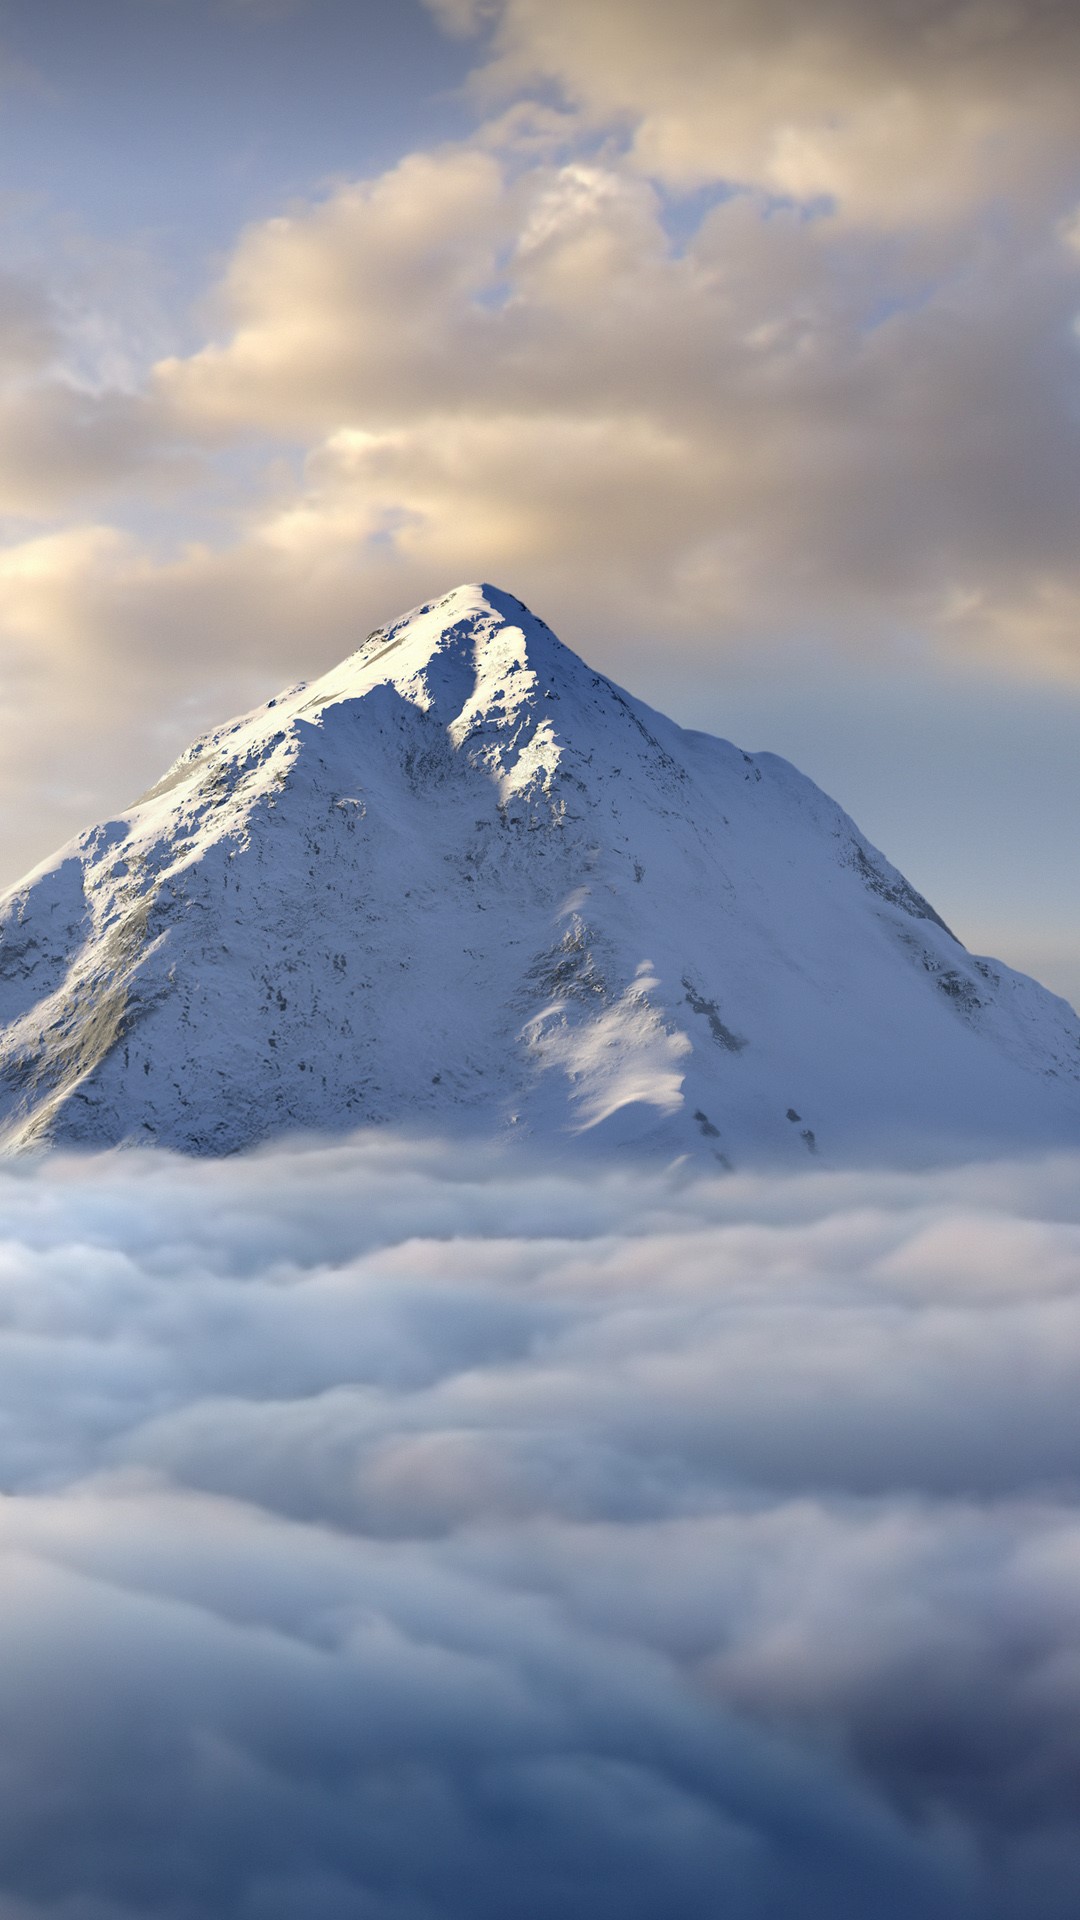 Snow-covered mountaintop above clouds | Windows 10 Spotlight Images